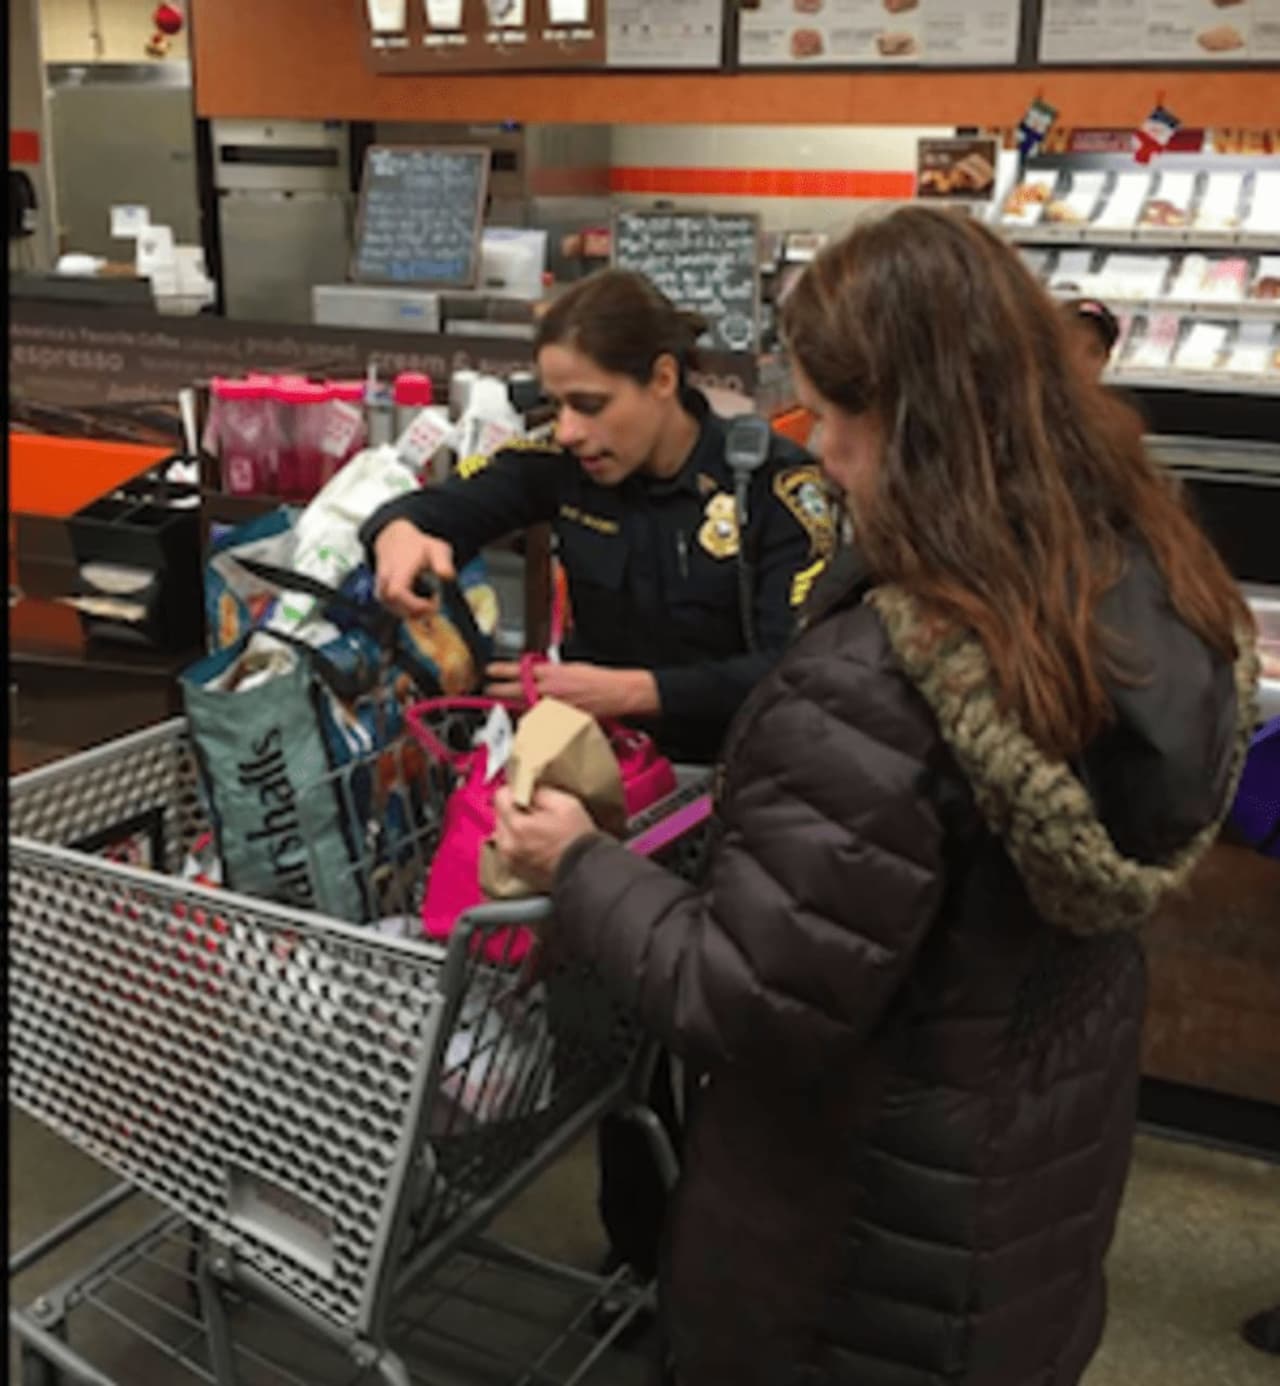 Sgt. Sofia Gulino checks with a customer on how to protect valuables from theft while shopping.